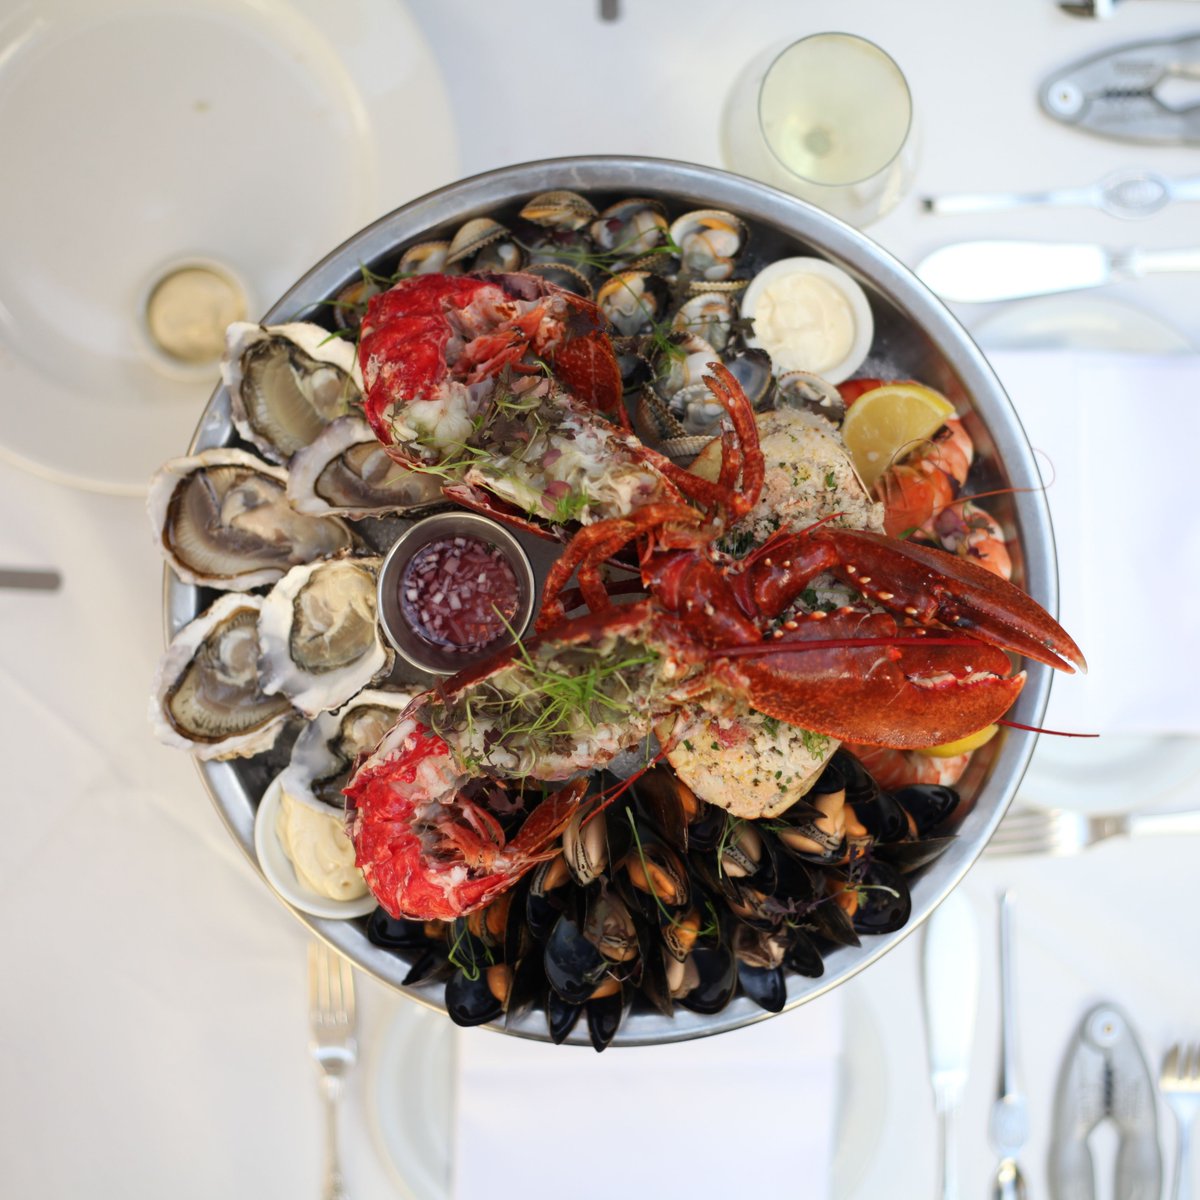 Back by popular demand - our Platterday offer! Ddine with us on a Friday and receive 15% off any sharing platter or seafood stew for two, with a free glass of fizz. #platterday #englishs #englishsofbrighton